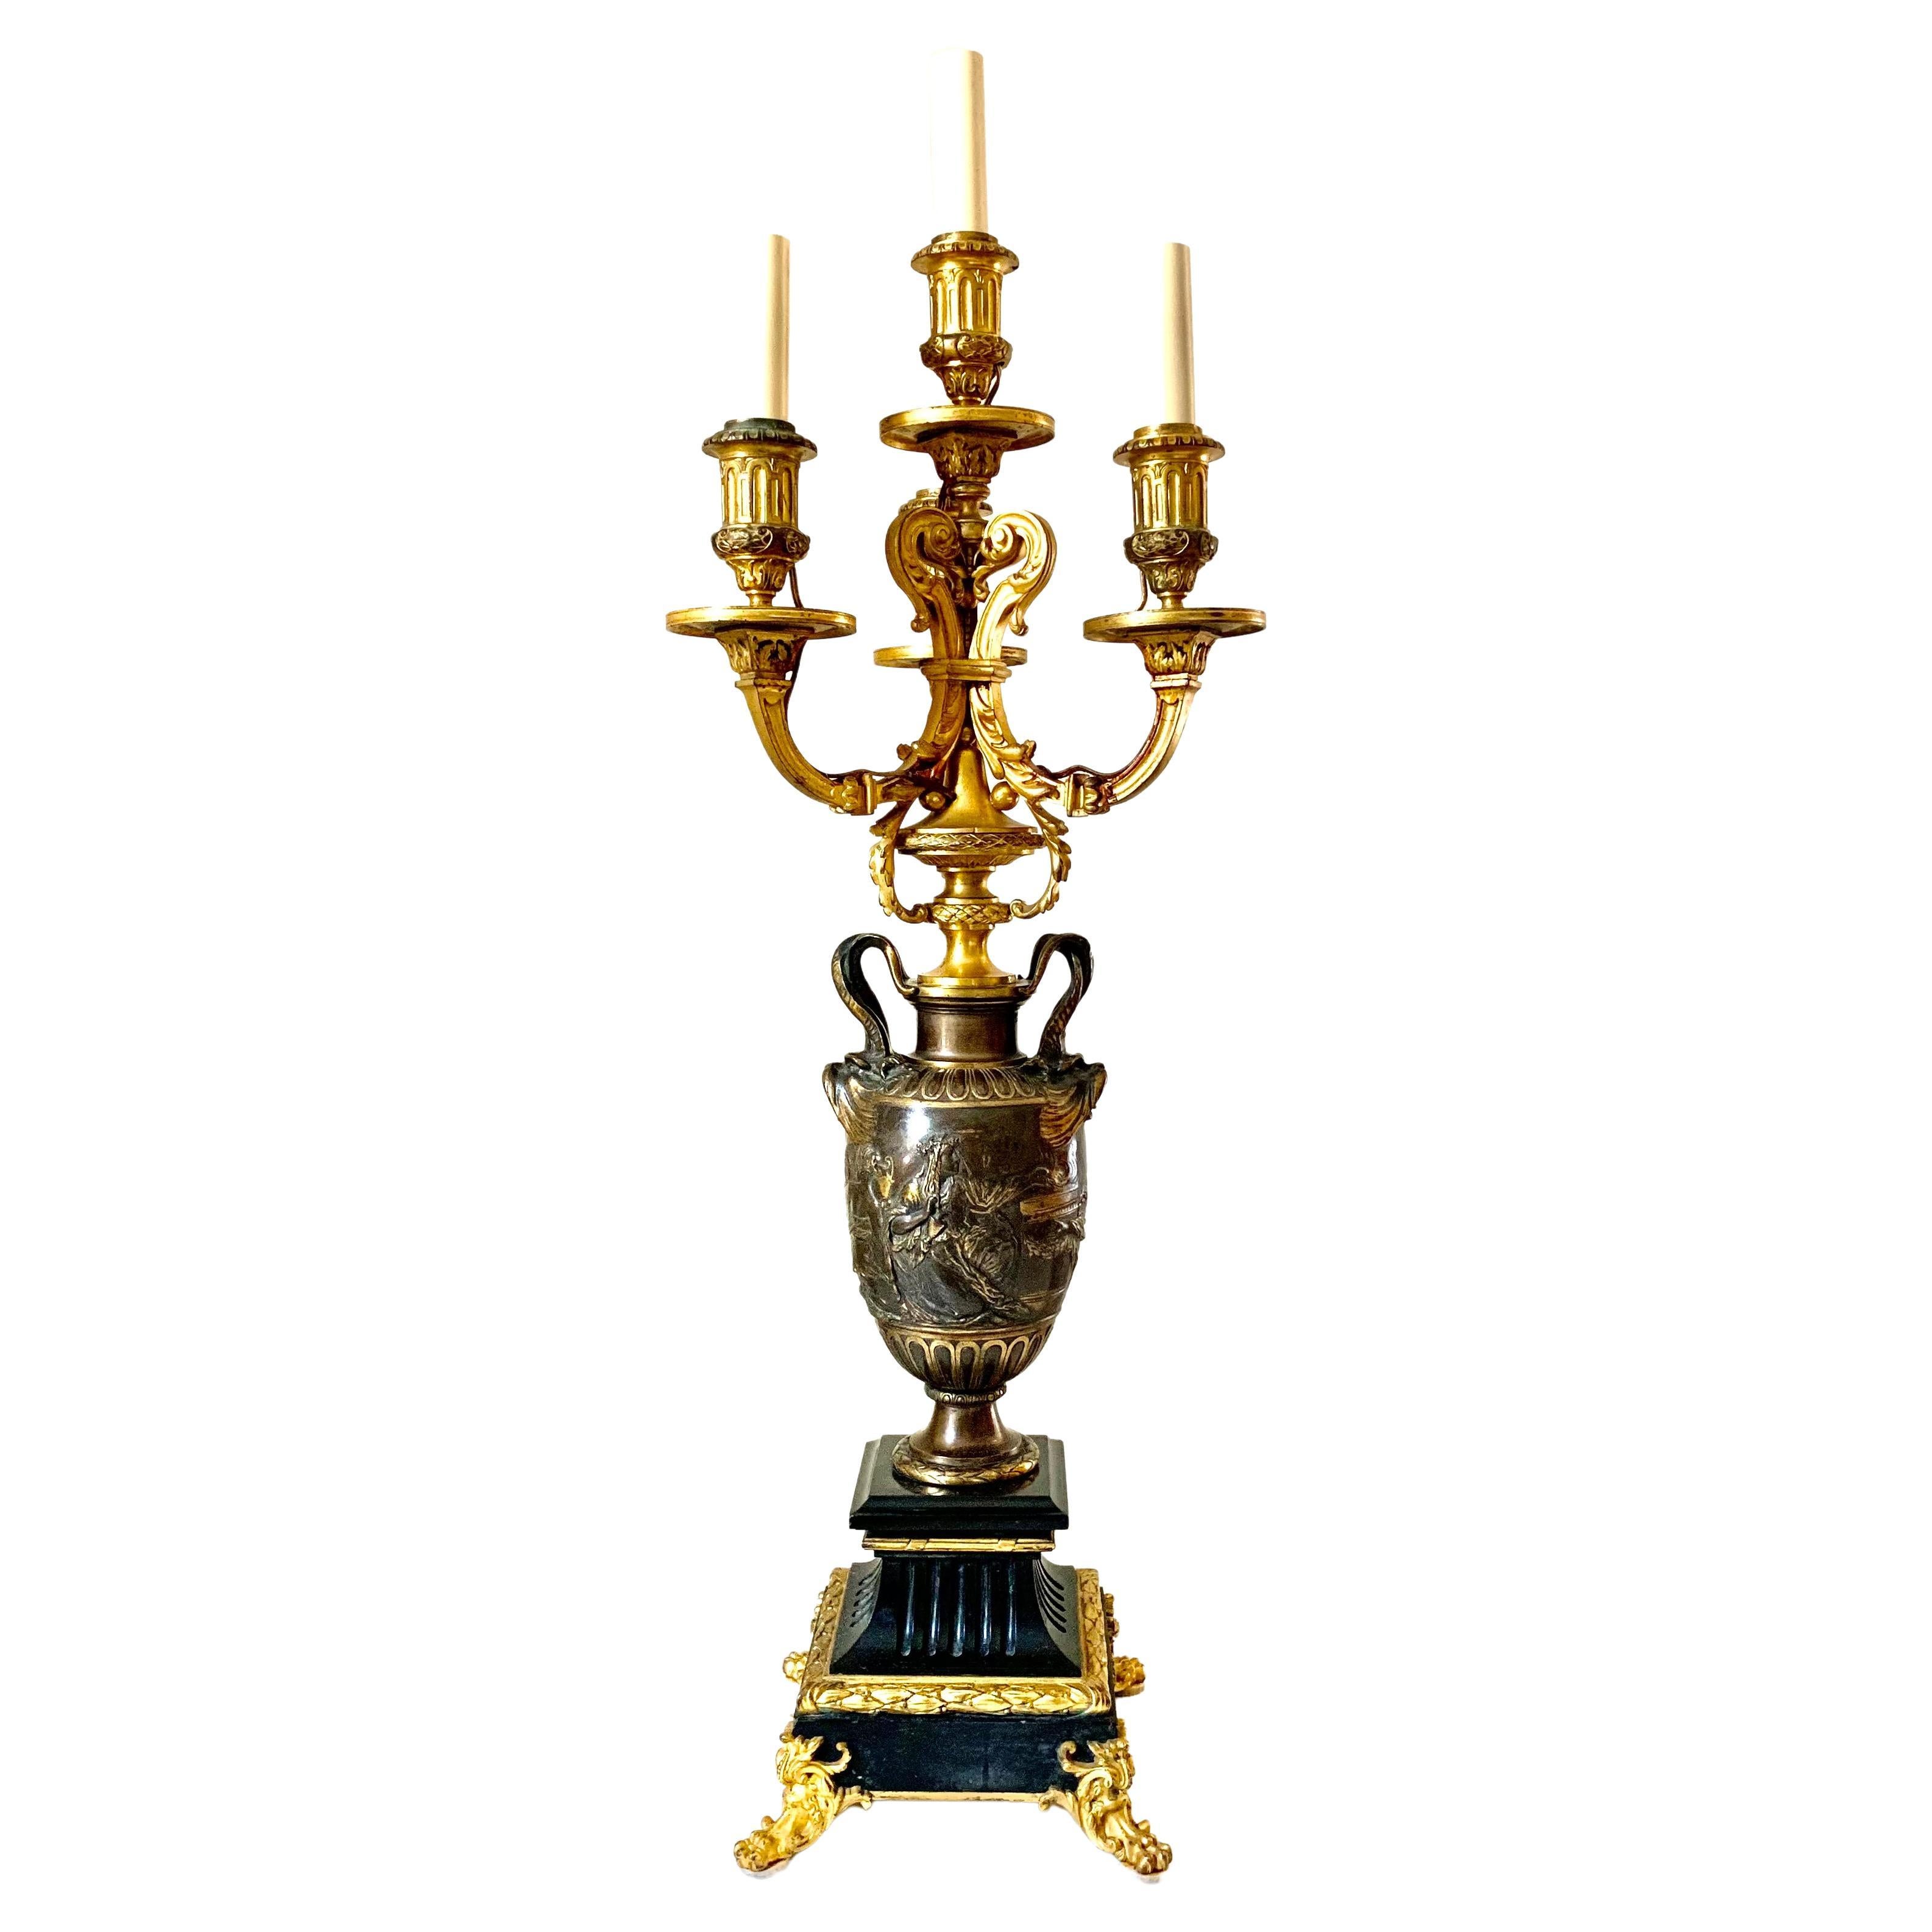 Superb F. Barbidienne Gilt, Patinated Bronze Napoleon III Figural Table Lamp For Sale